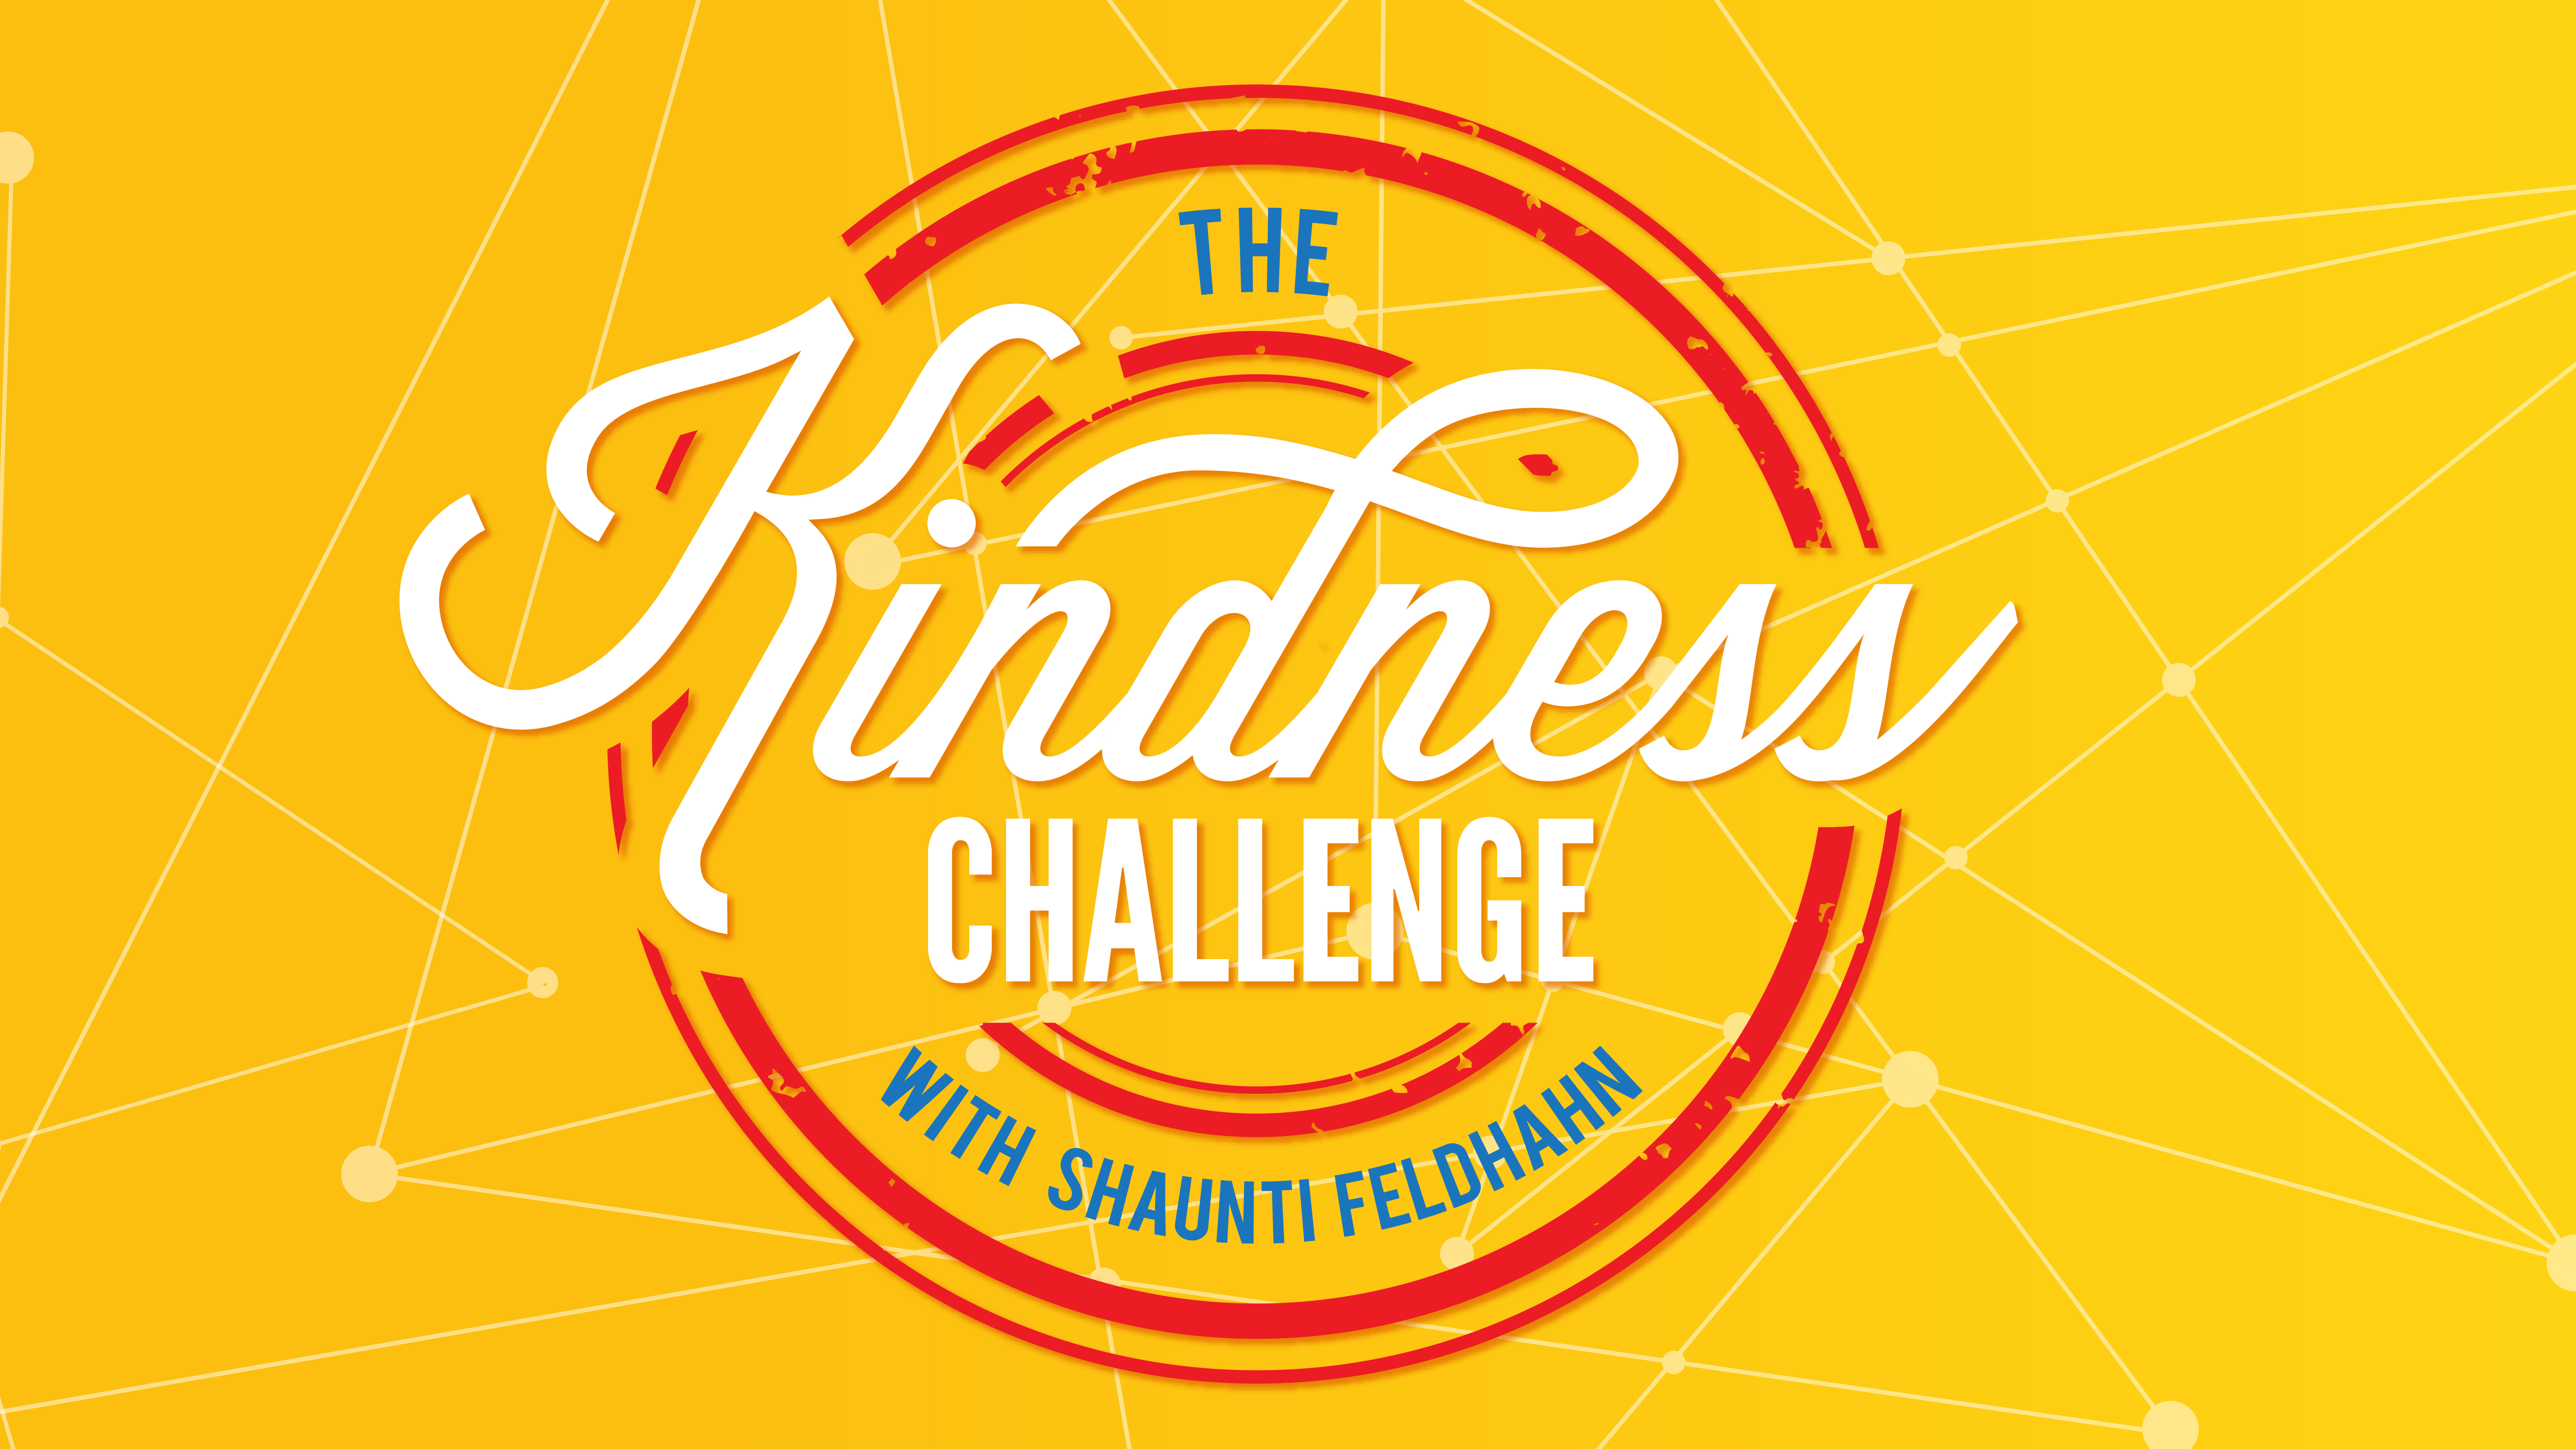 The Kindness Challenge with Shaunti Feldhahn